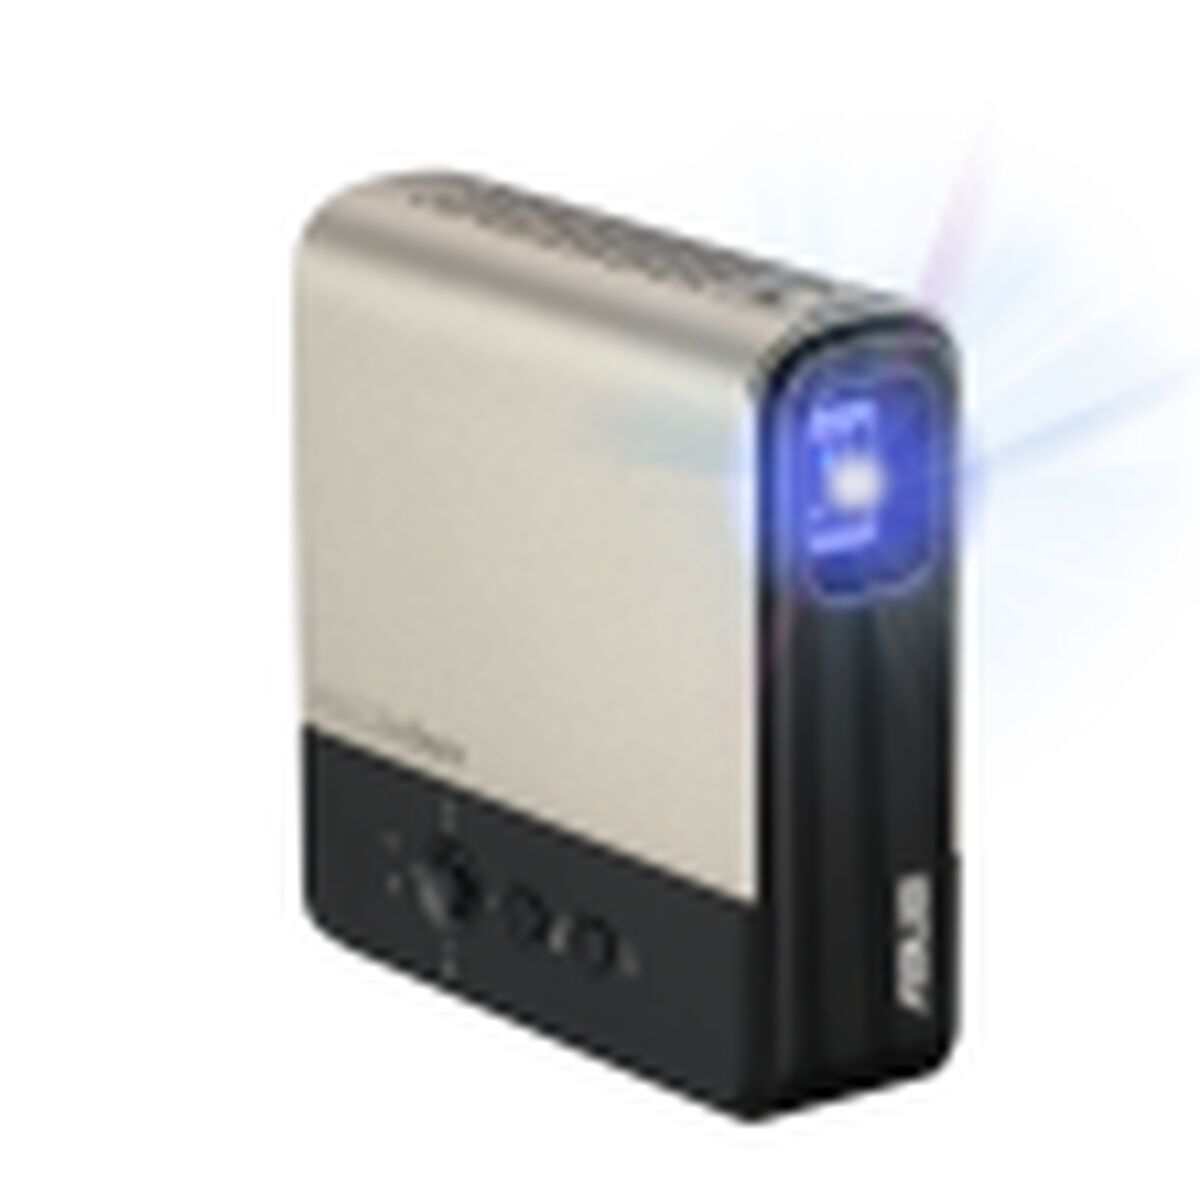 Projector Asus ZenBeam E2 Full HD WVGA, Asus, Electronics, TV, Video and home cinema, projector-asus-zenbeam-e2-full-hd-wvga, Brand_Asus, category-reference-2609, category-reference-2642, category-reference-2947, category-reference-t-18805, category-reference-t-18811, category-reference-t-19653, cinema and television, computers / peripherals, Condition_NEW, entertainment, office, Price_300 - 400, RiotNook